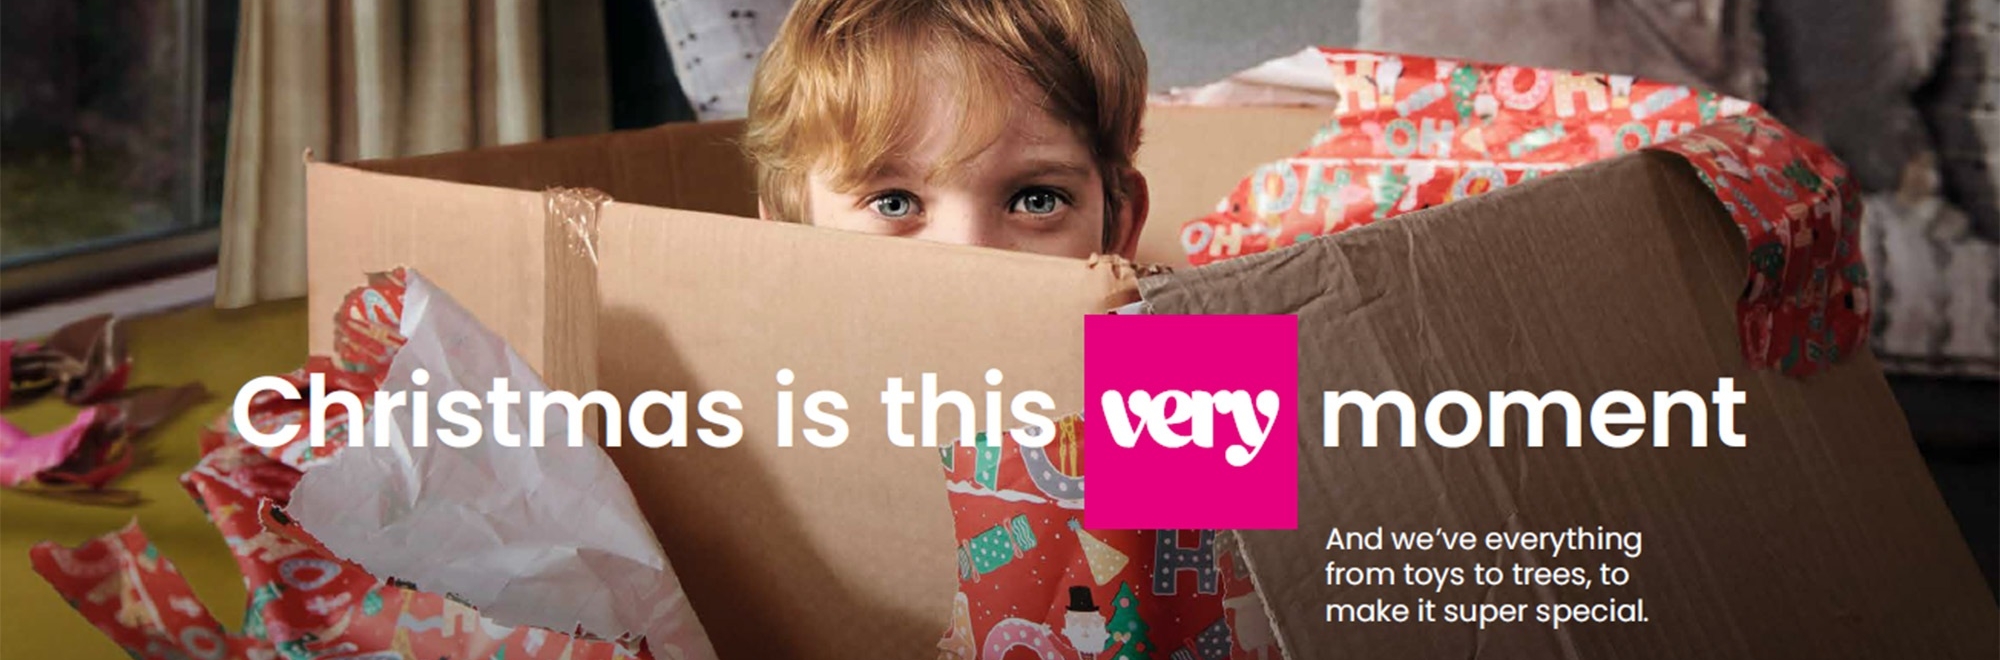 Very.co.uk’s new campaign takes the cliché out of Christmas